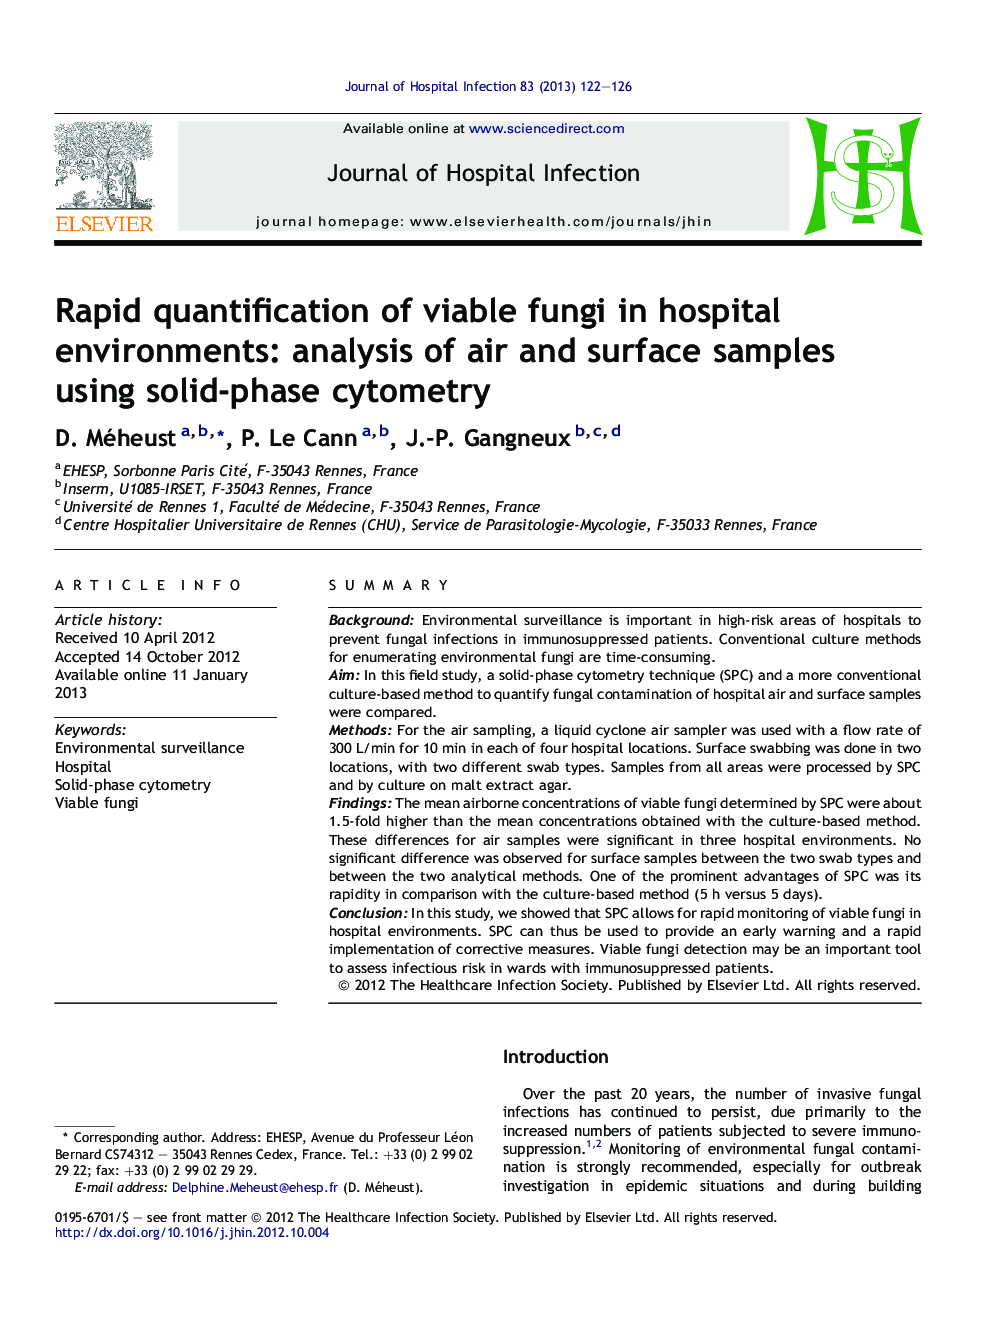 Rapid quantification of viable fungi in hospital environments: analysis of air and surface samples using solid-phase cytometry